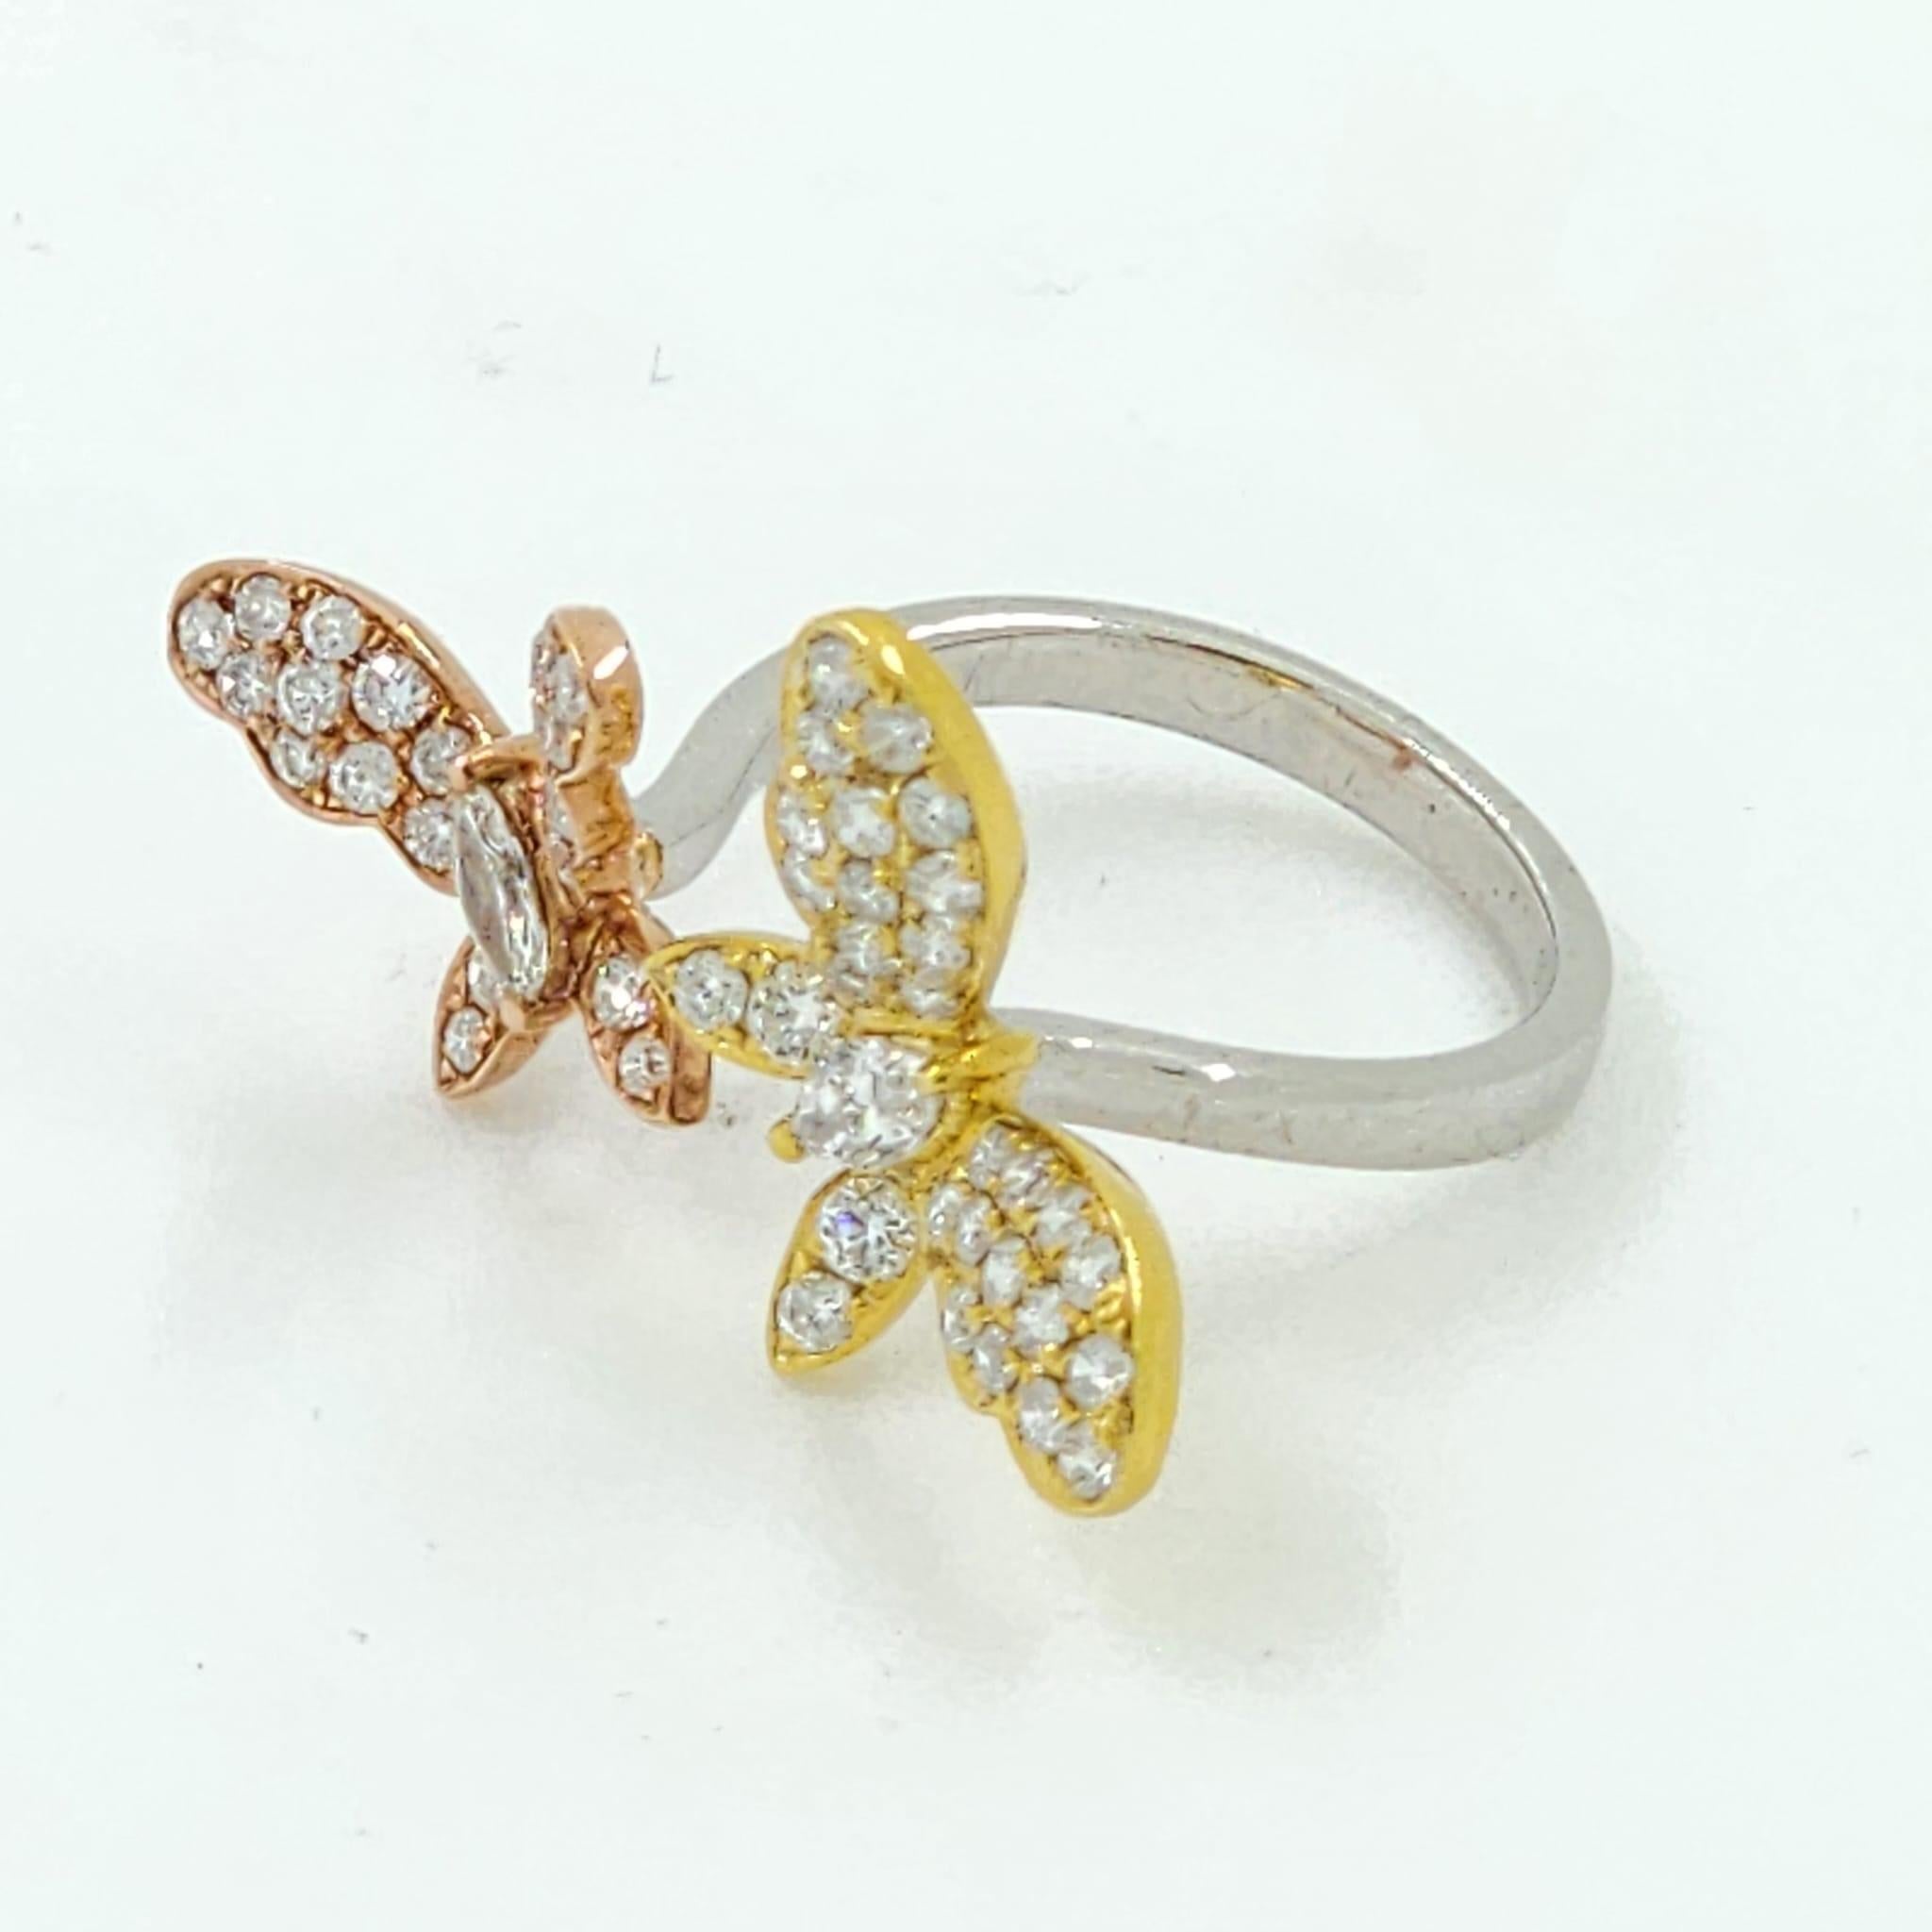 Experience the epitome of luxury and craftsmanship with our Tri-Gold Marquise Diamond Butterfly Ring. Elegantly fashioned in a harmonious blend of 18 karat rose, white, and yellow gold, this ring exudes an air of unparalleled sophistication. At its